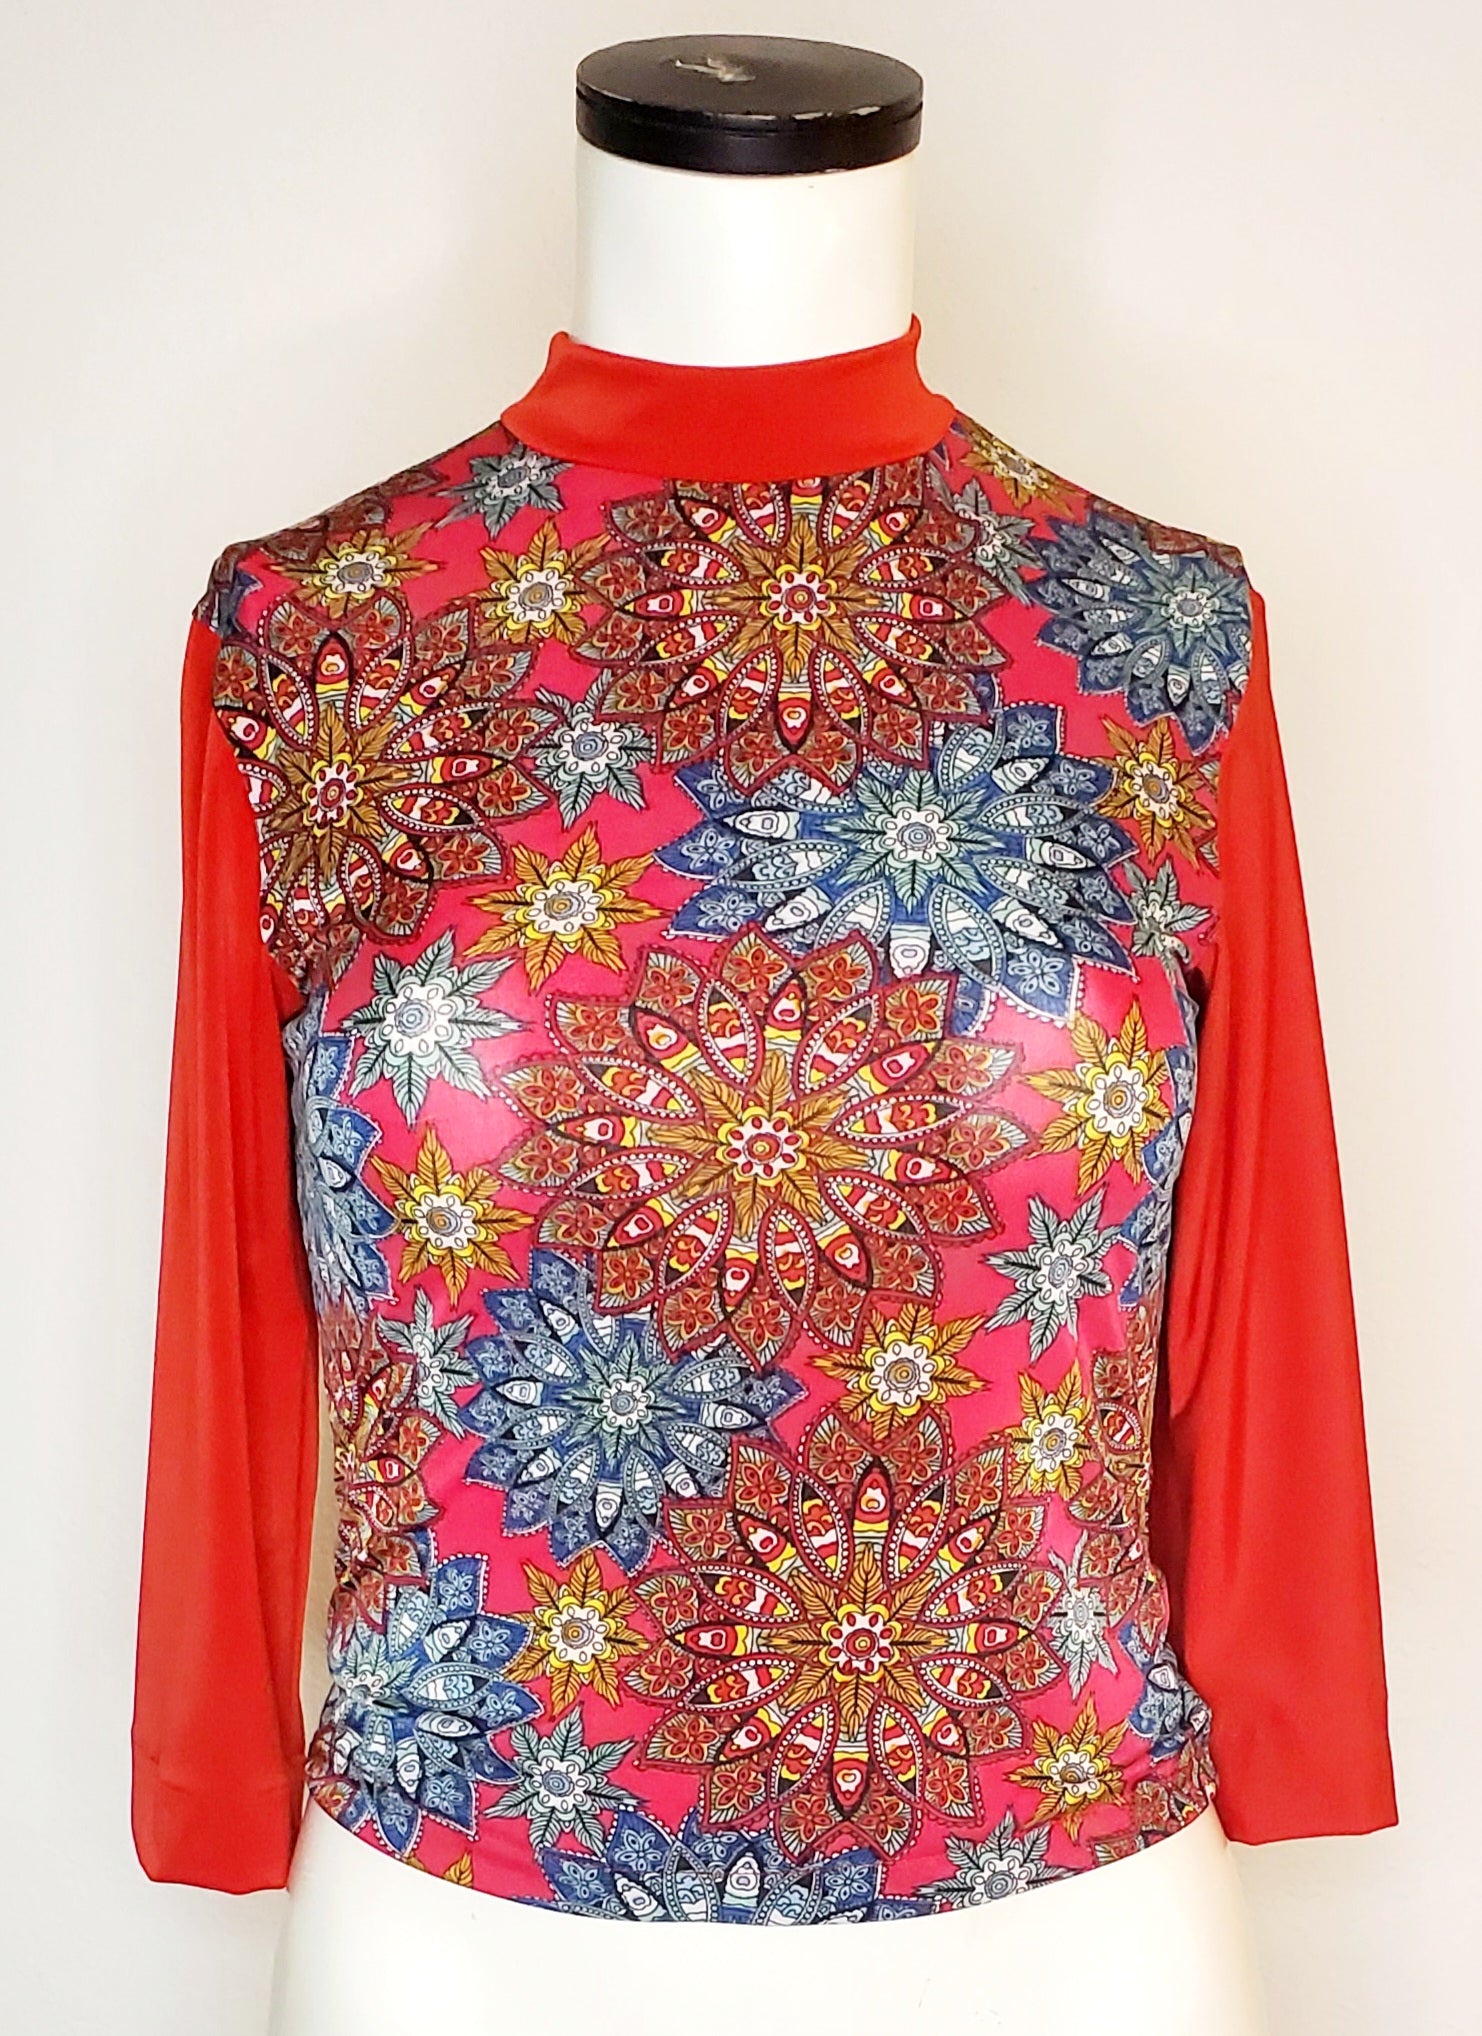 KTE Red floral knit top